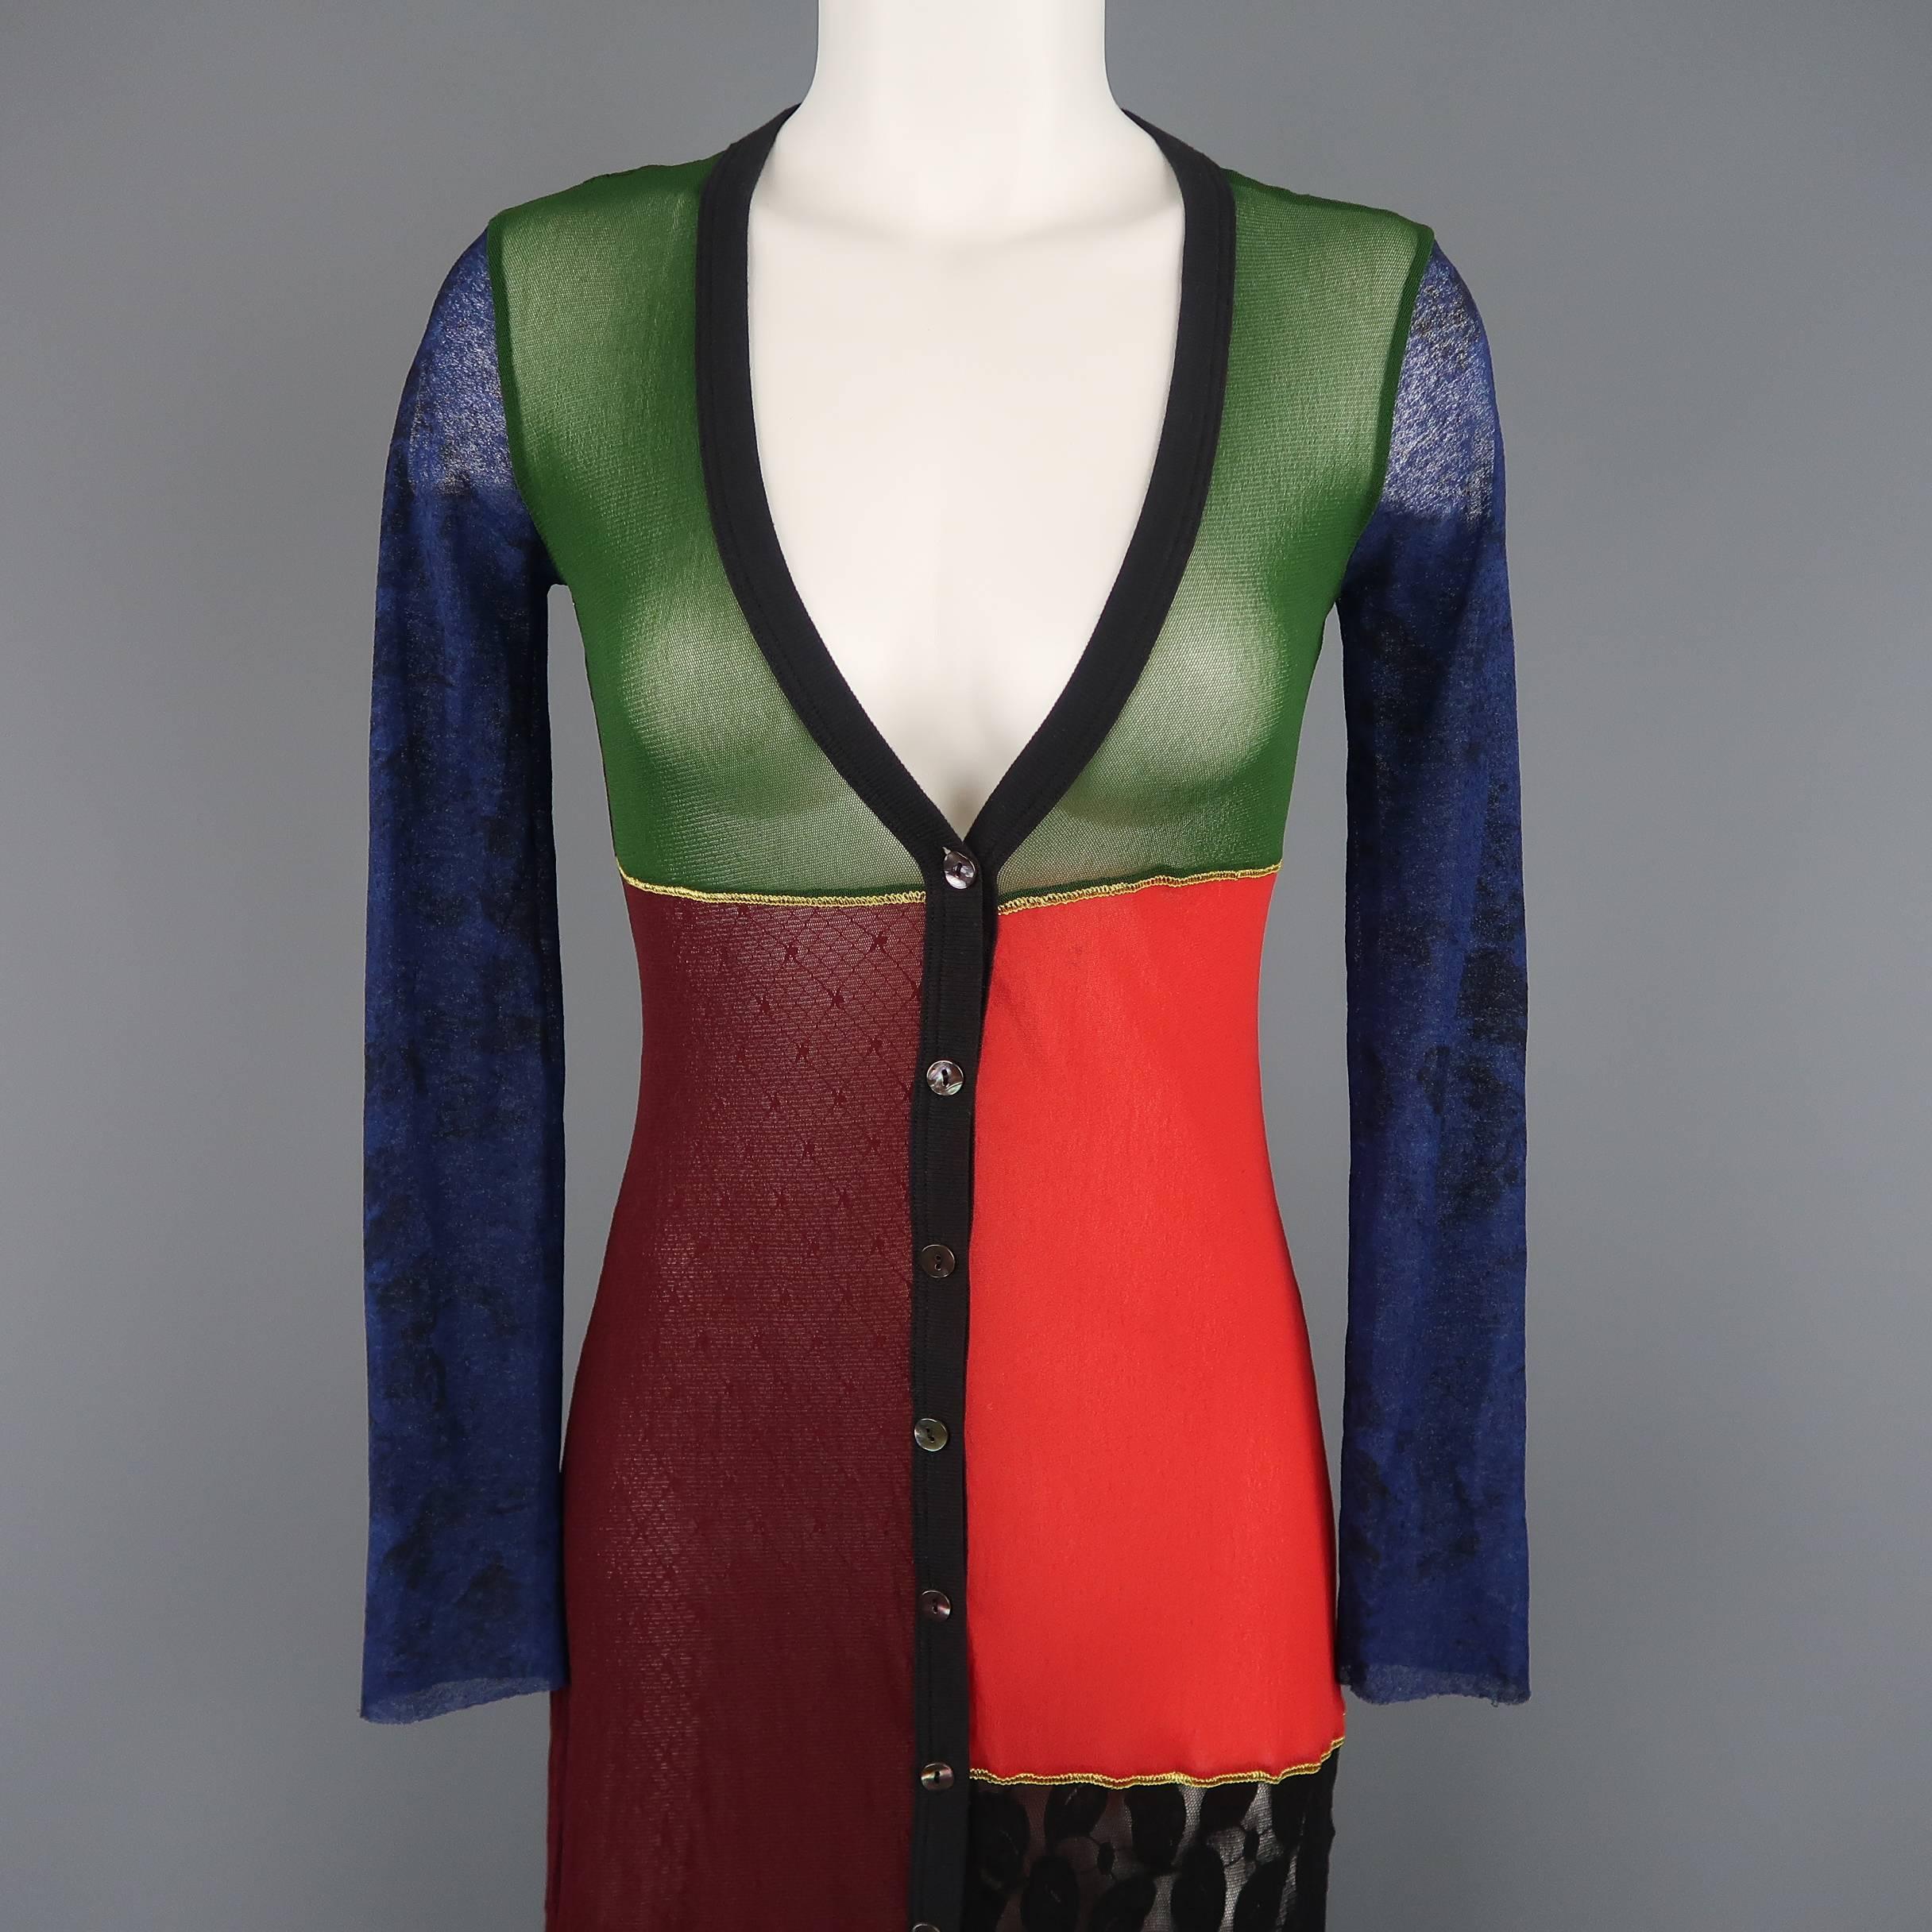 Vintage Jean Paul Gaultier cardigan dress comes in multi-color patchwork micro-mesh and lace with hues of green, red, burgundy, yellow, and blue with an elephant print back and deep V neck front. Made in Italy.
 
Excellent Pre-Owned